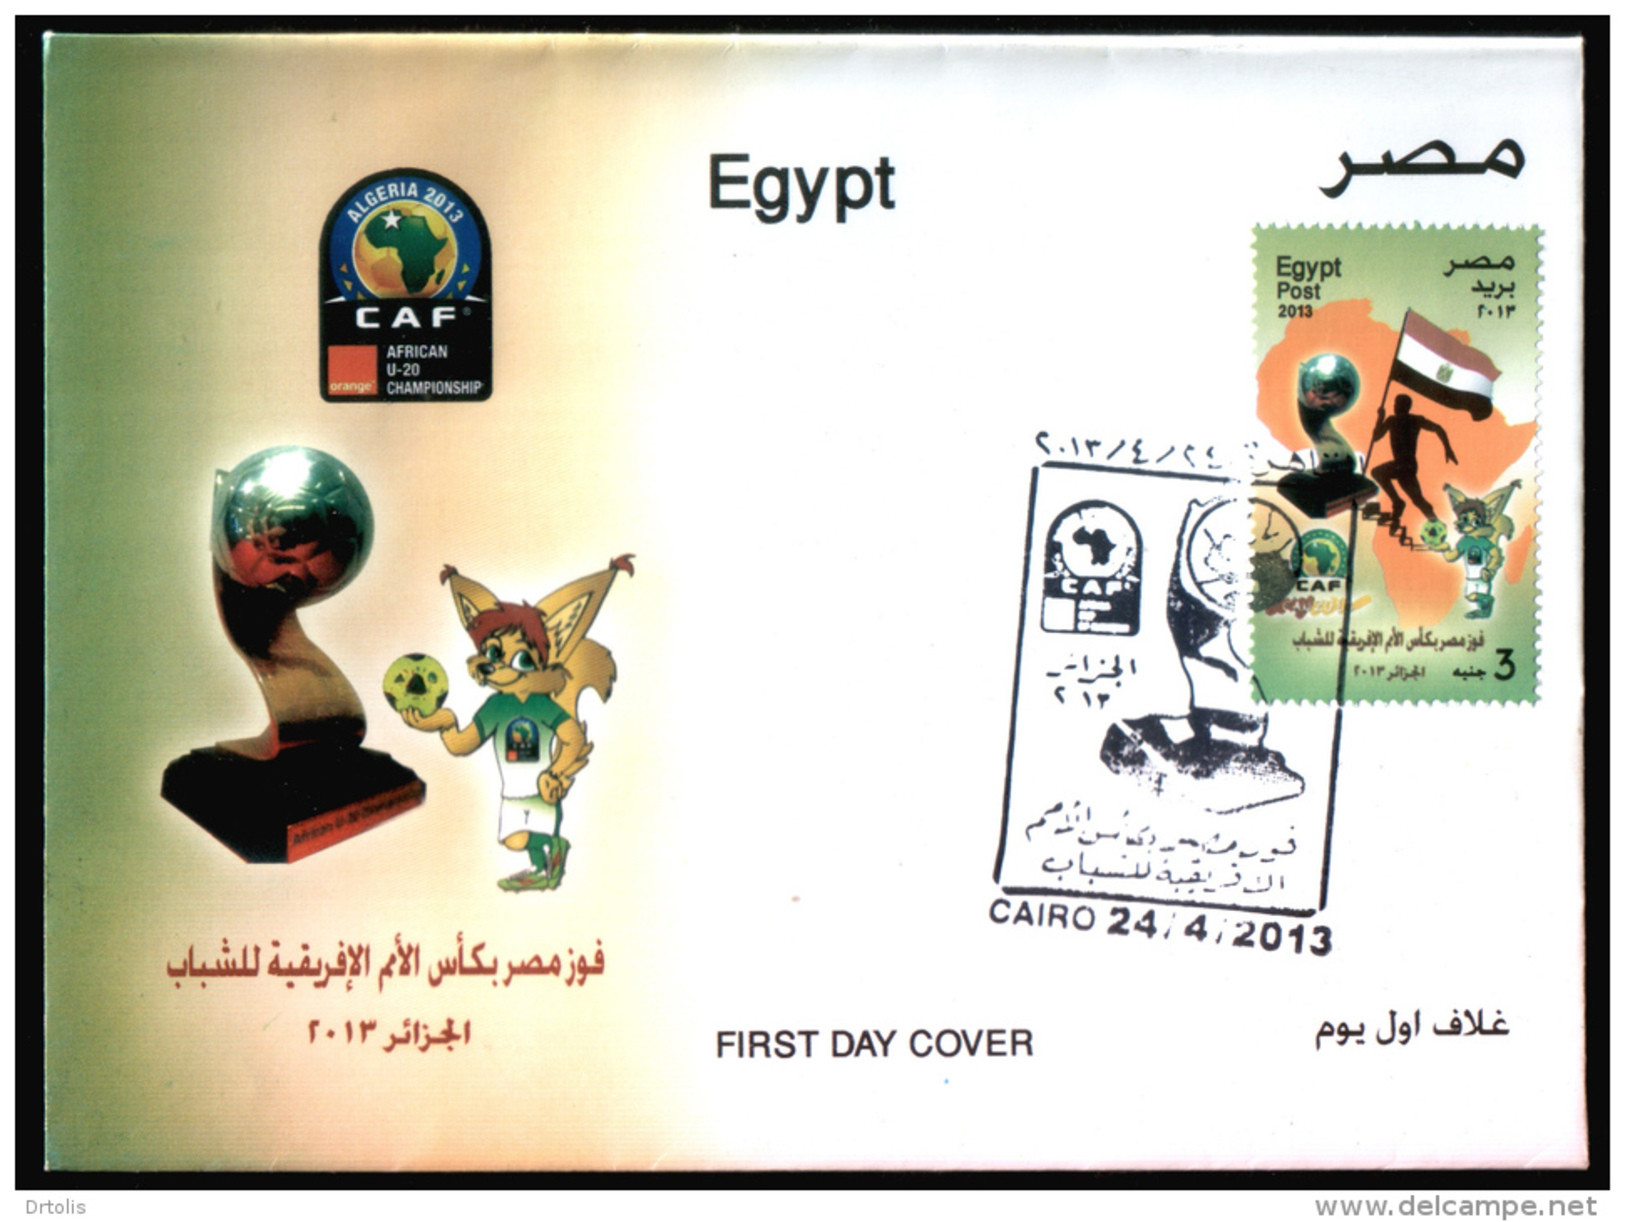 EGYPT / 2013 / SPORT / FOOTBALL / CAF / AFRICA CUP OF NATIONS SOCCER TOURNAMENT FOR YOUTH ; ALGERIA / MAP / FLAG / FDC - Lettres & Documents